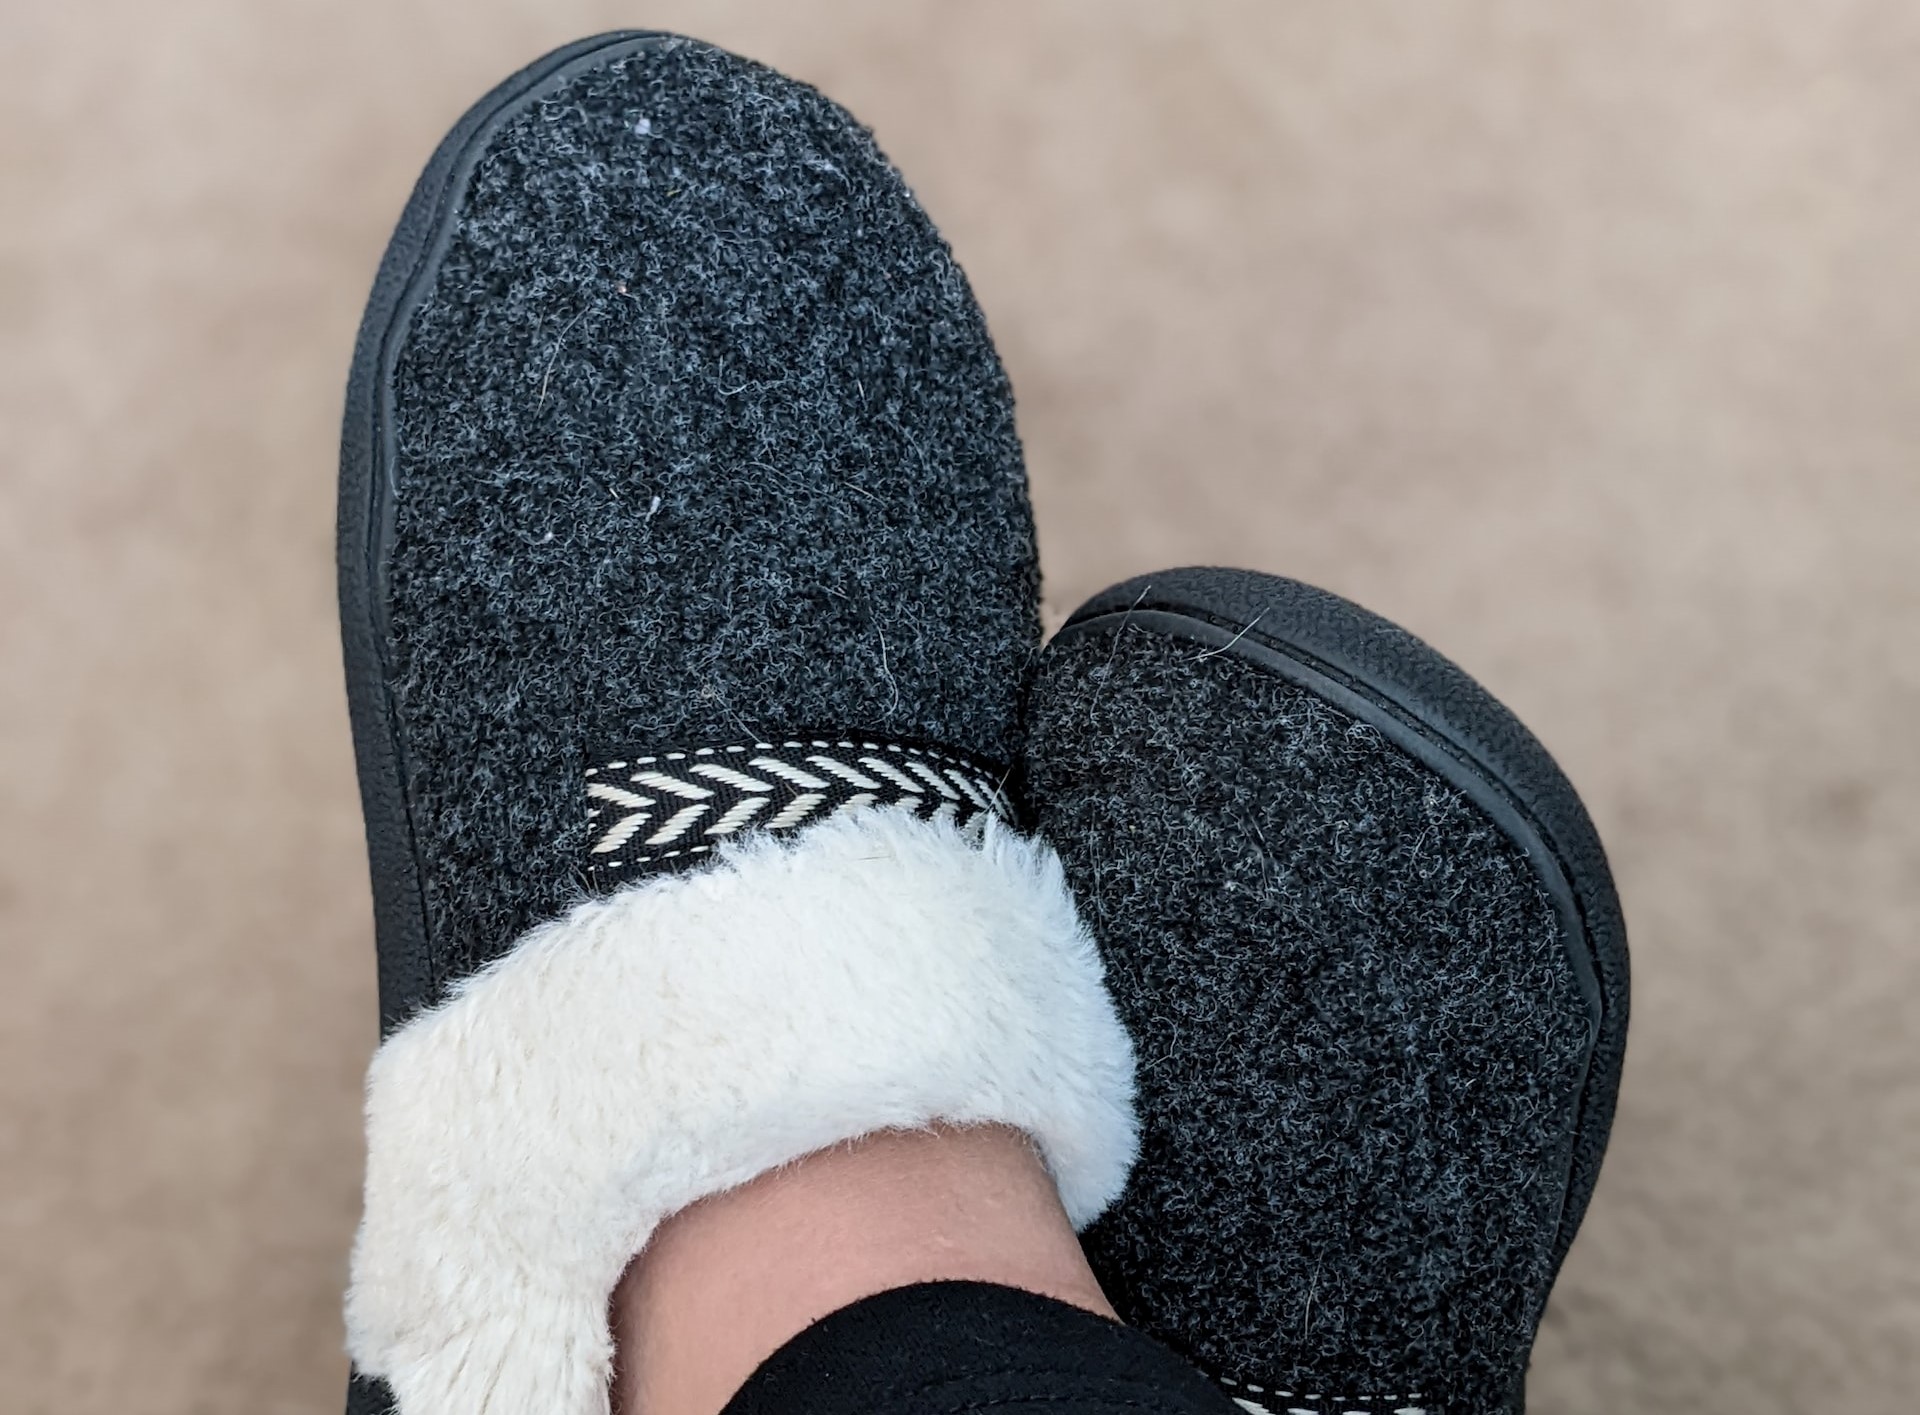 Sheepskin Slippers For Winter – How To Choose The Right Pair